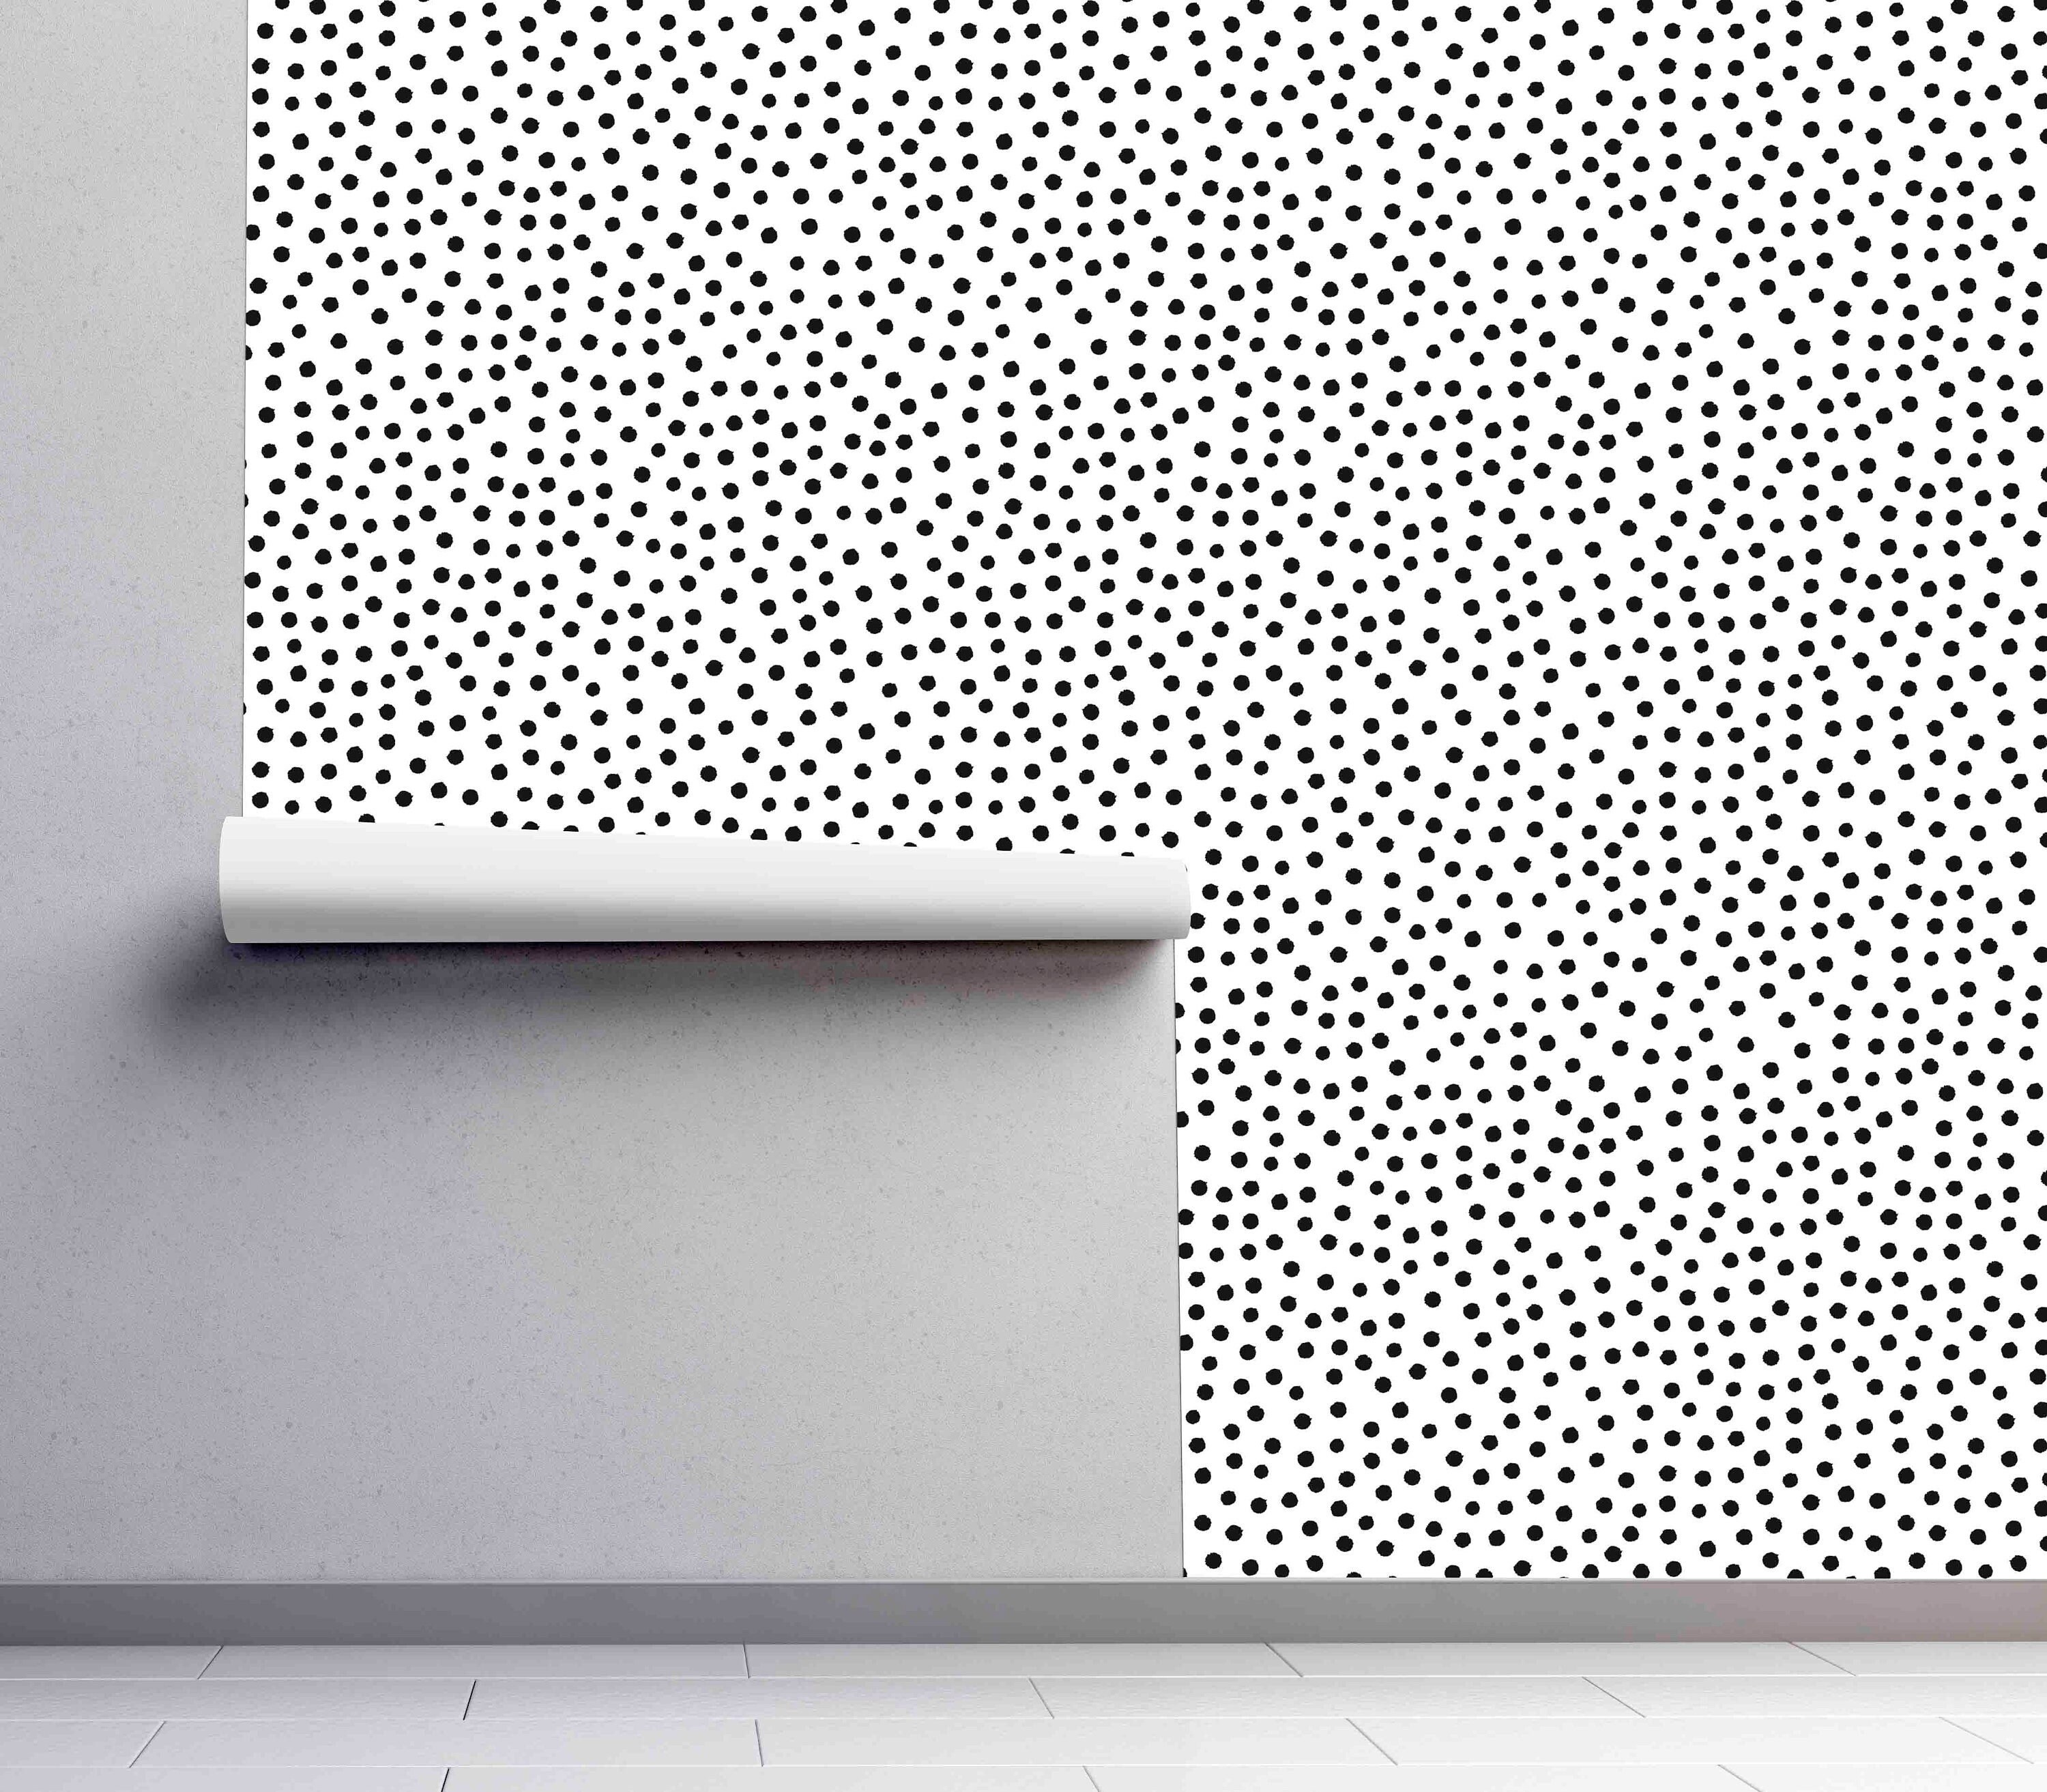 Dots Pattern Wallpaper by Green Planet Removable Wall Murals Woven Peel & Stick Wallpaper Black Dots on White Background Wallcovering